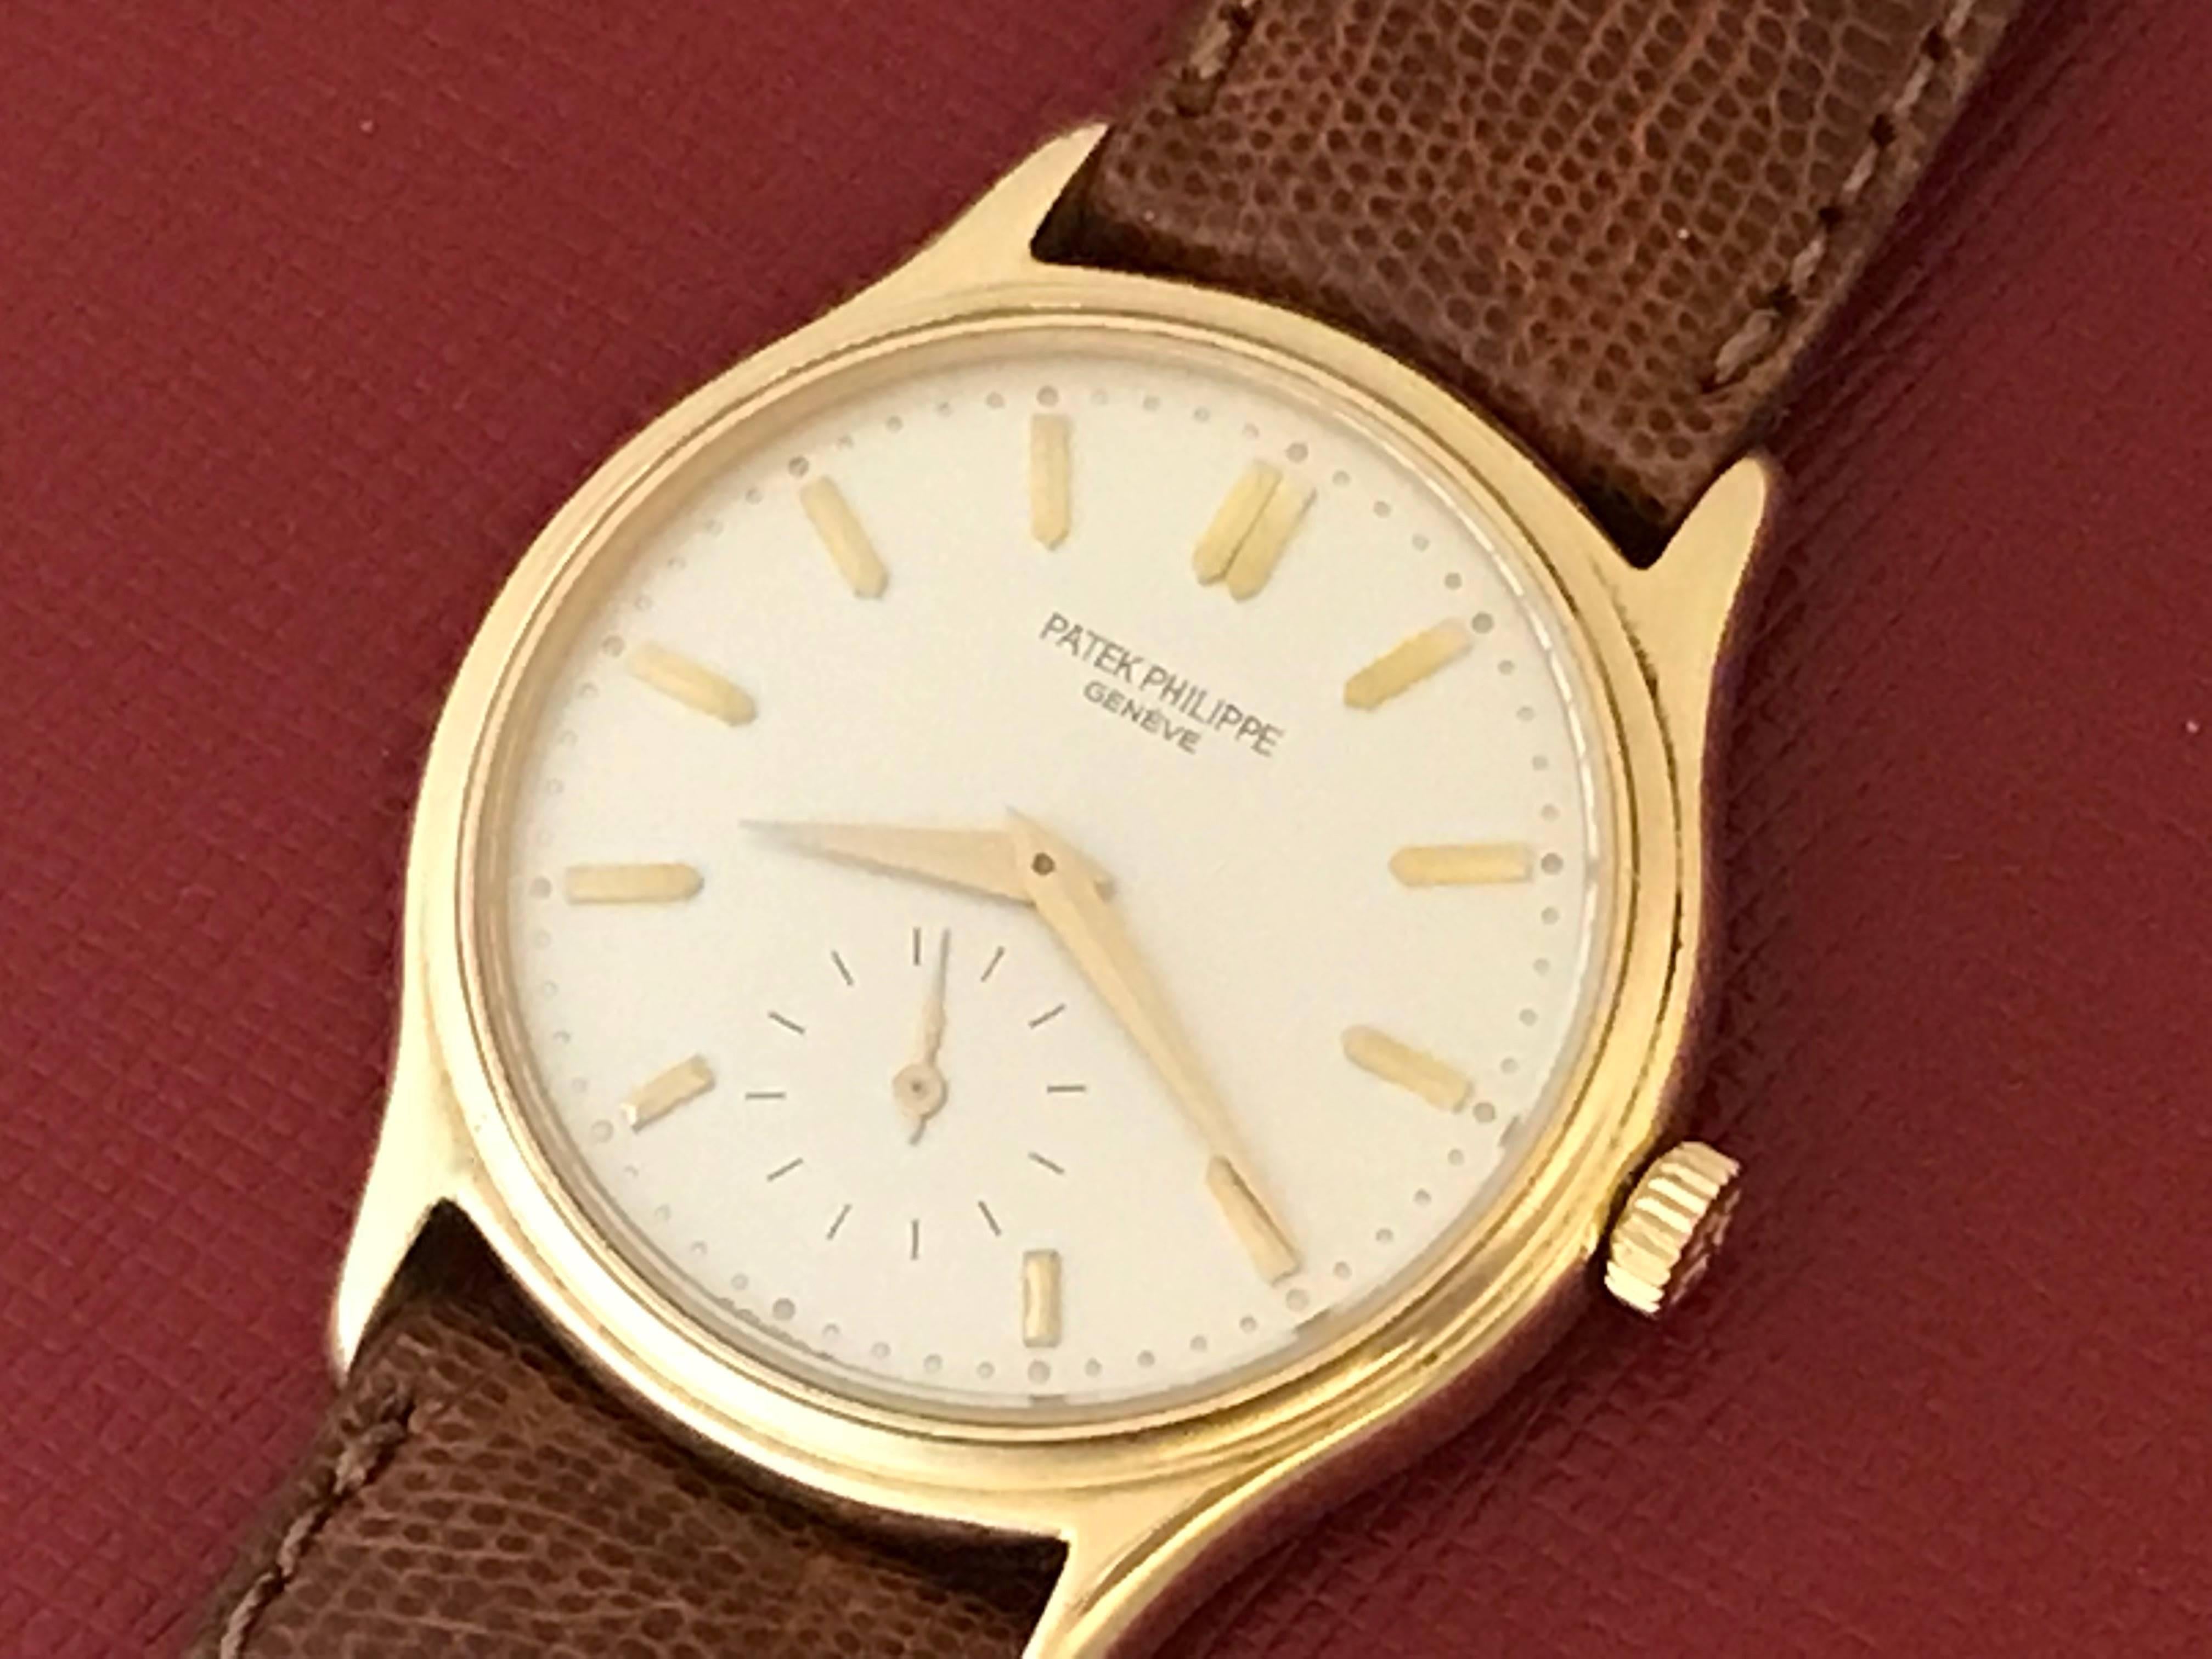 Patek Philippe Model 3923 Mens Wrist Watch. 18k Yellow Gold round case measuring 32mm diameter. Strap with yellow gold filled buckle. Silvered Dial with yellow gold hour markers. Certified pre-owned and ready to ship.  Inventory # C47522.